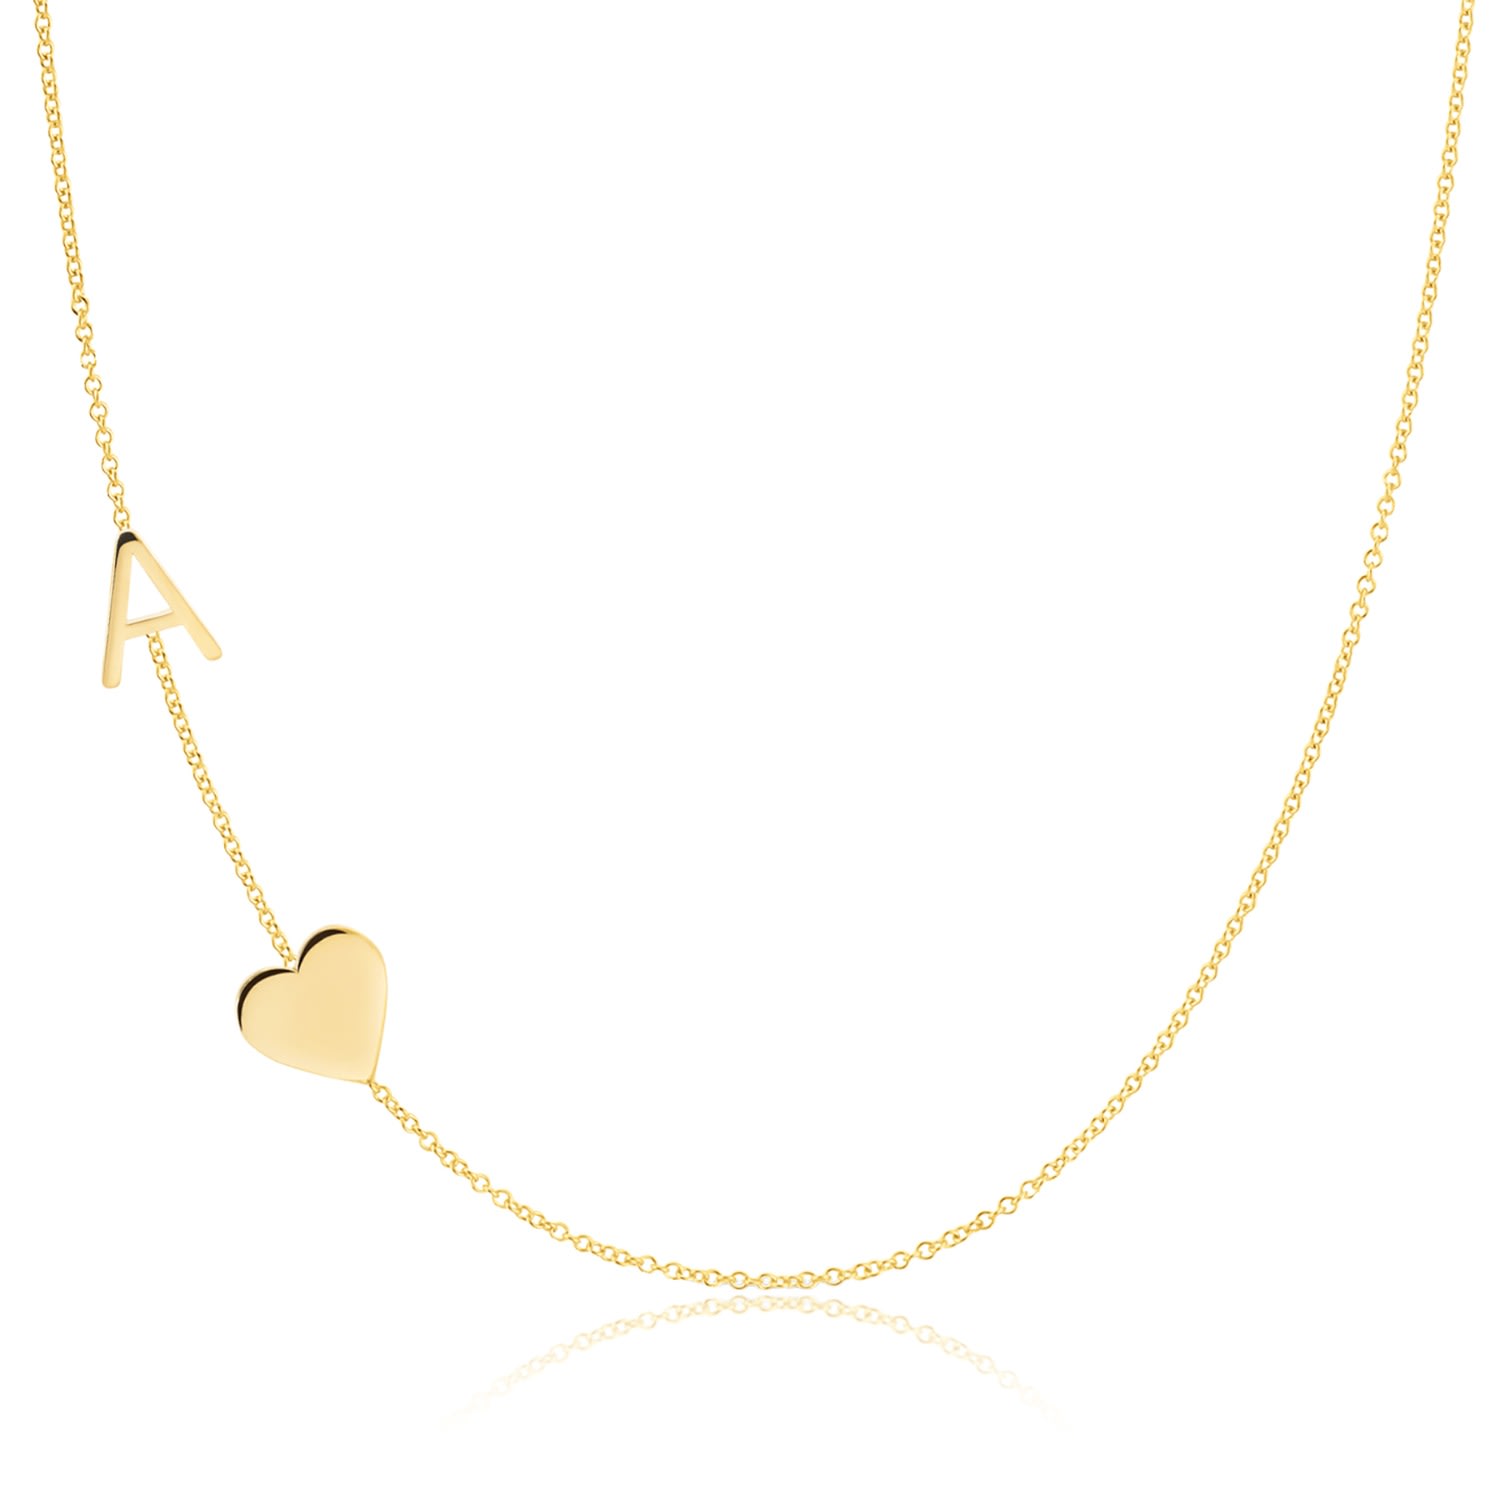 Maya Brenner Women's Monogram Necklace With Heart Yellow Gold - 16"